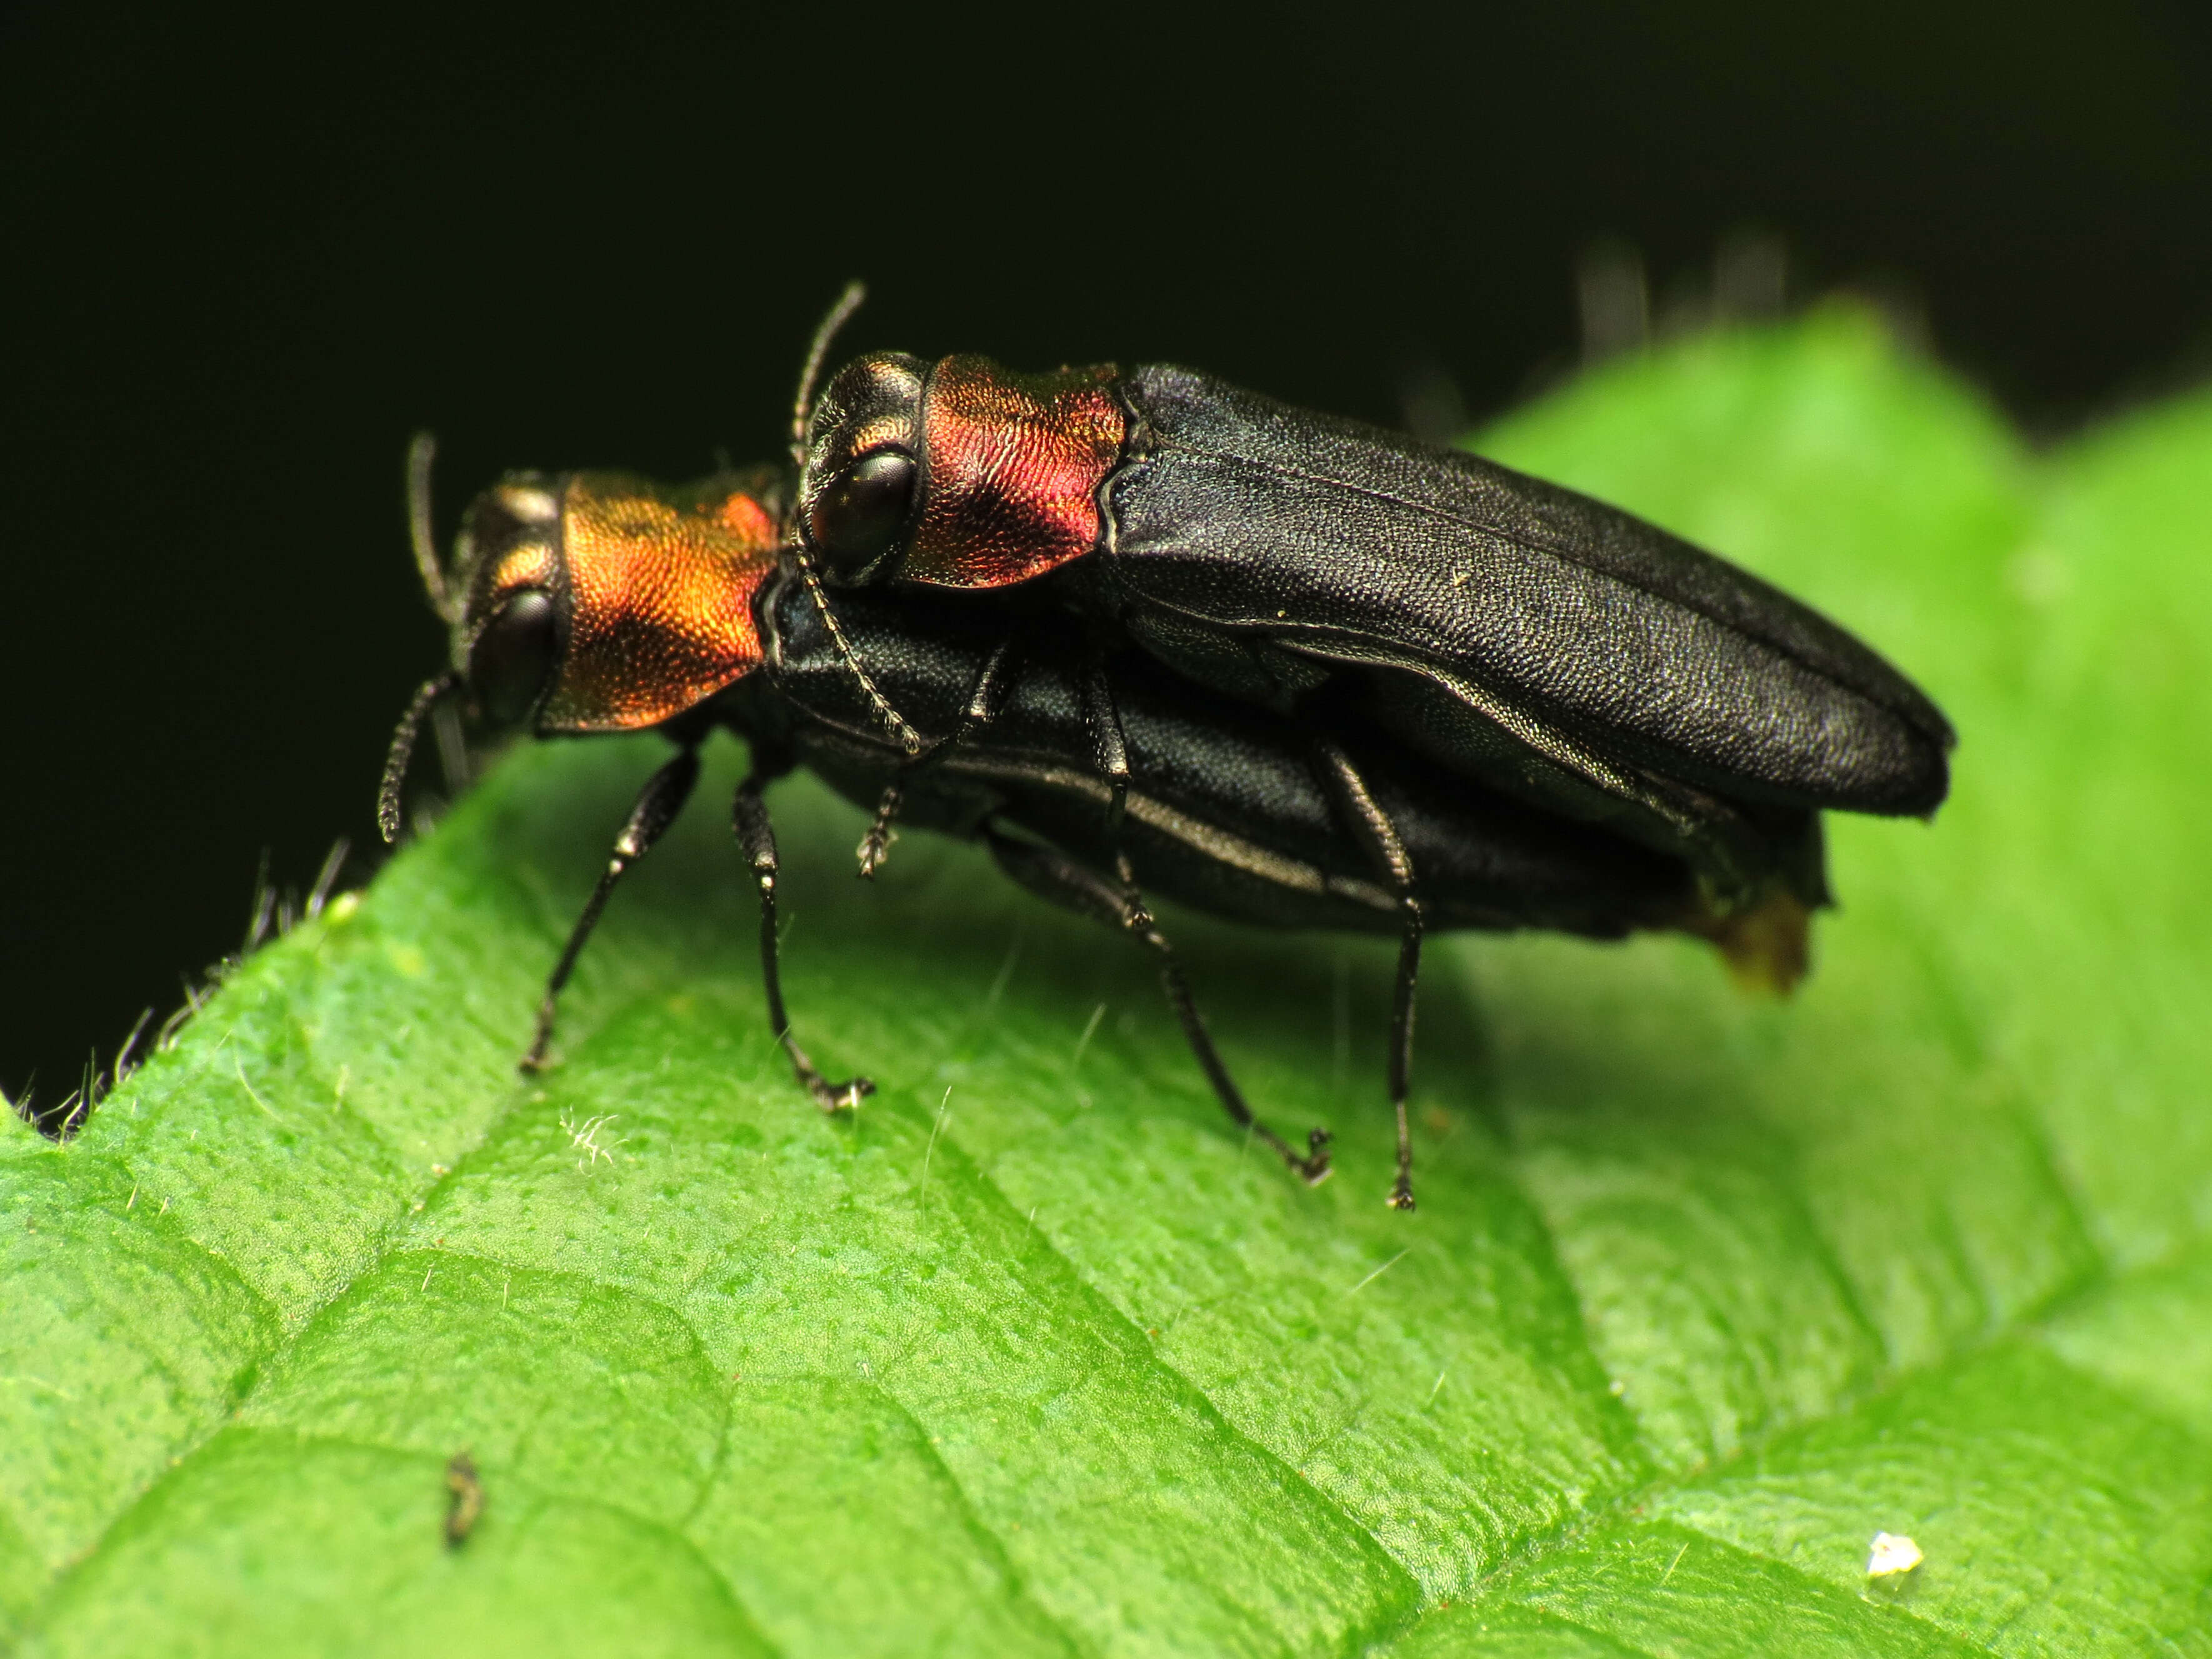 Image of Red-necked Cane Borer